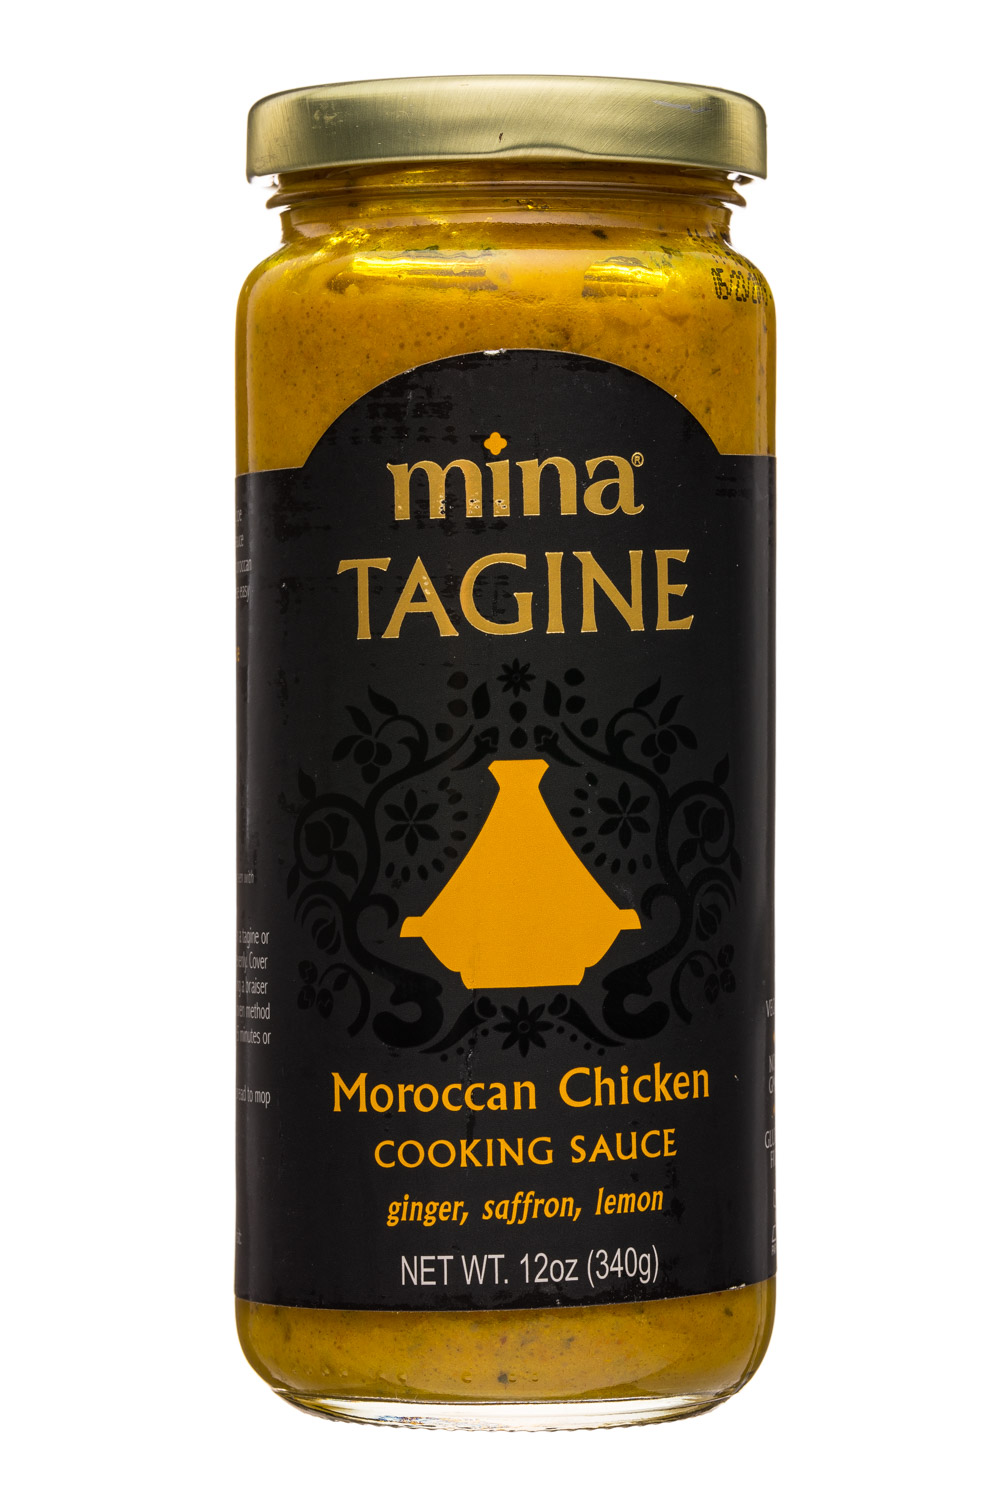 Moroccan Chicken Cooking Sauce